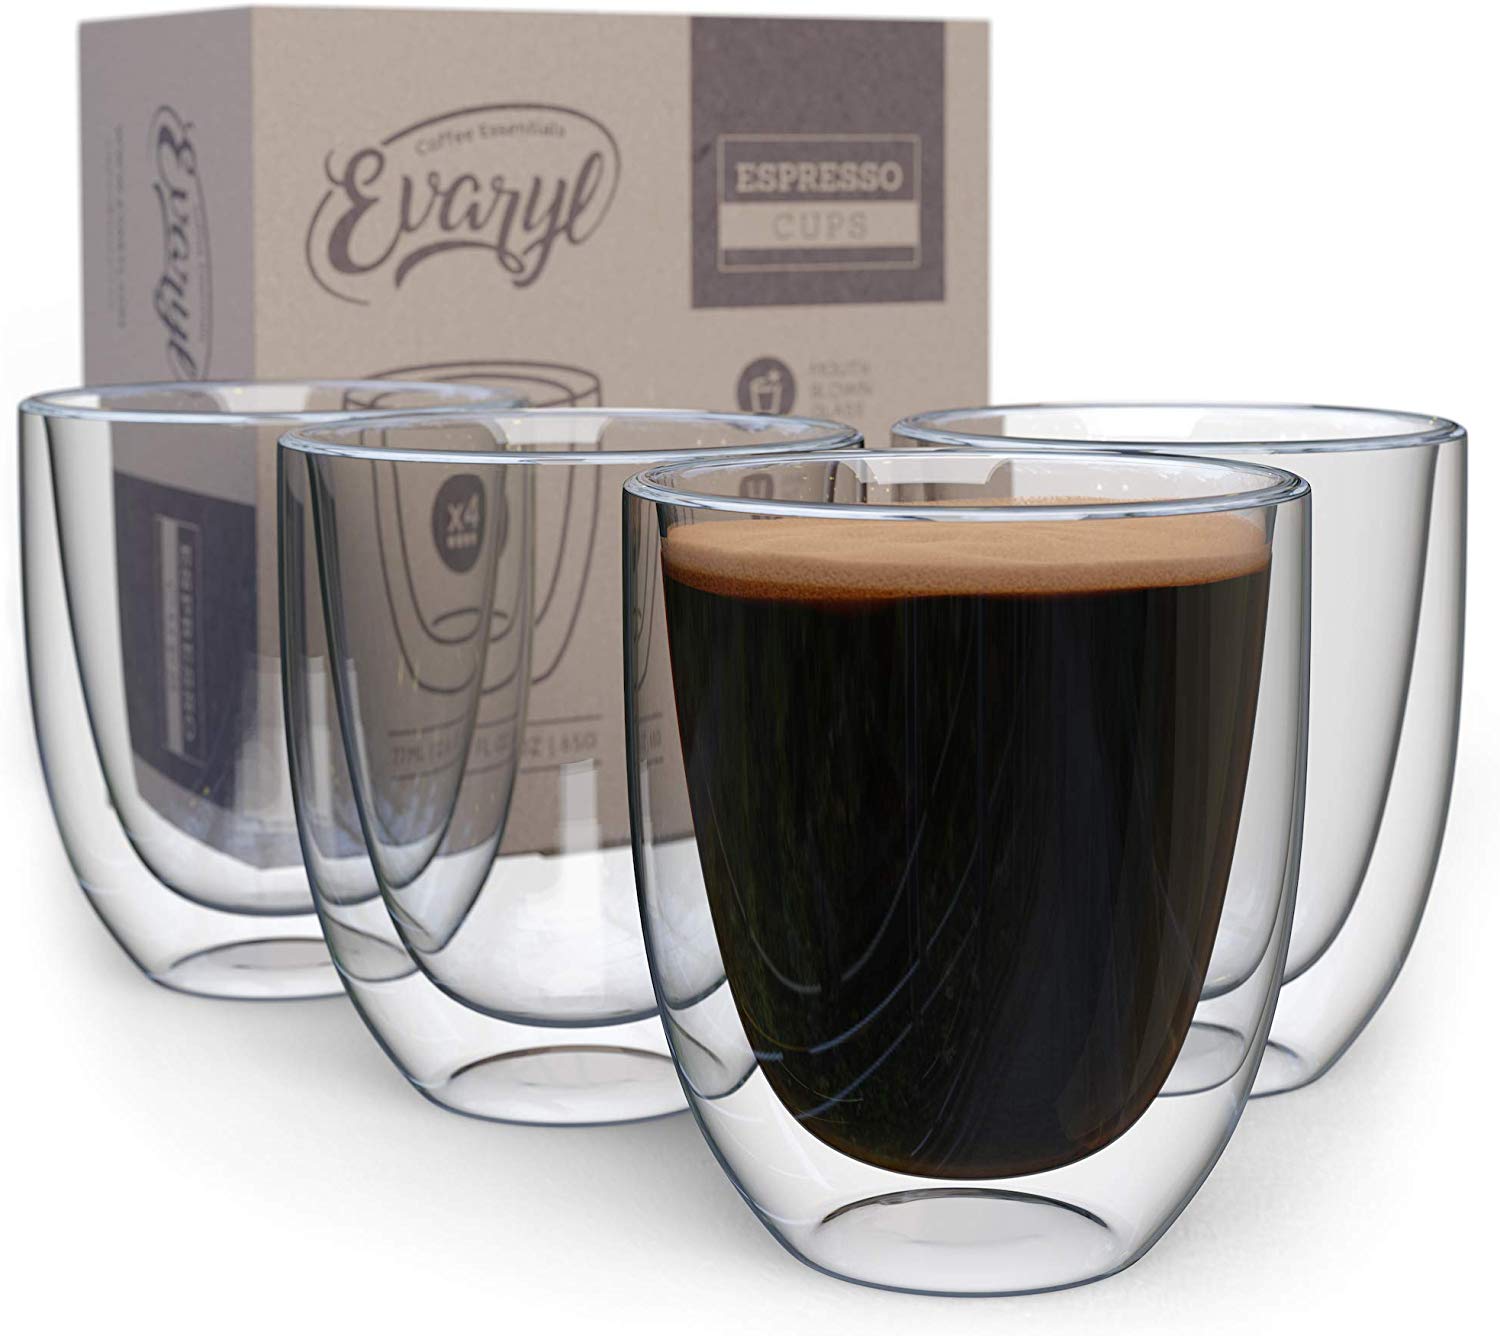 Evaryl Double Wall Espresso Cups, Set Of 4